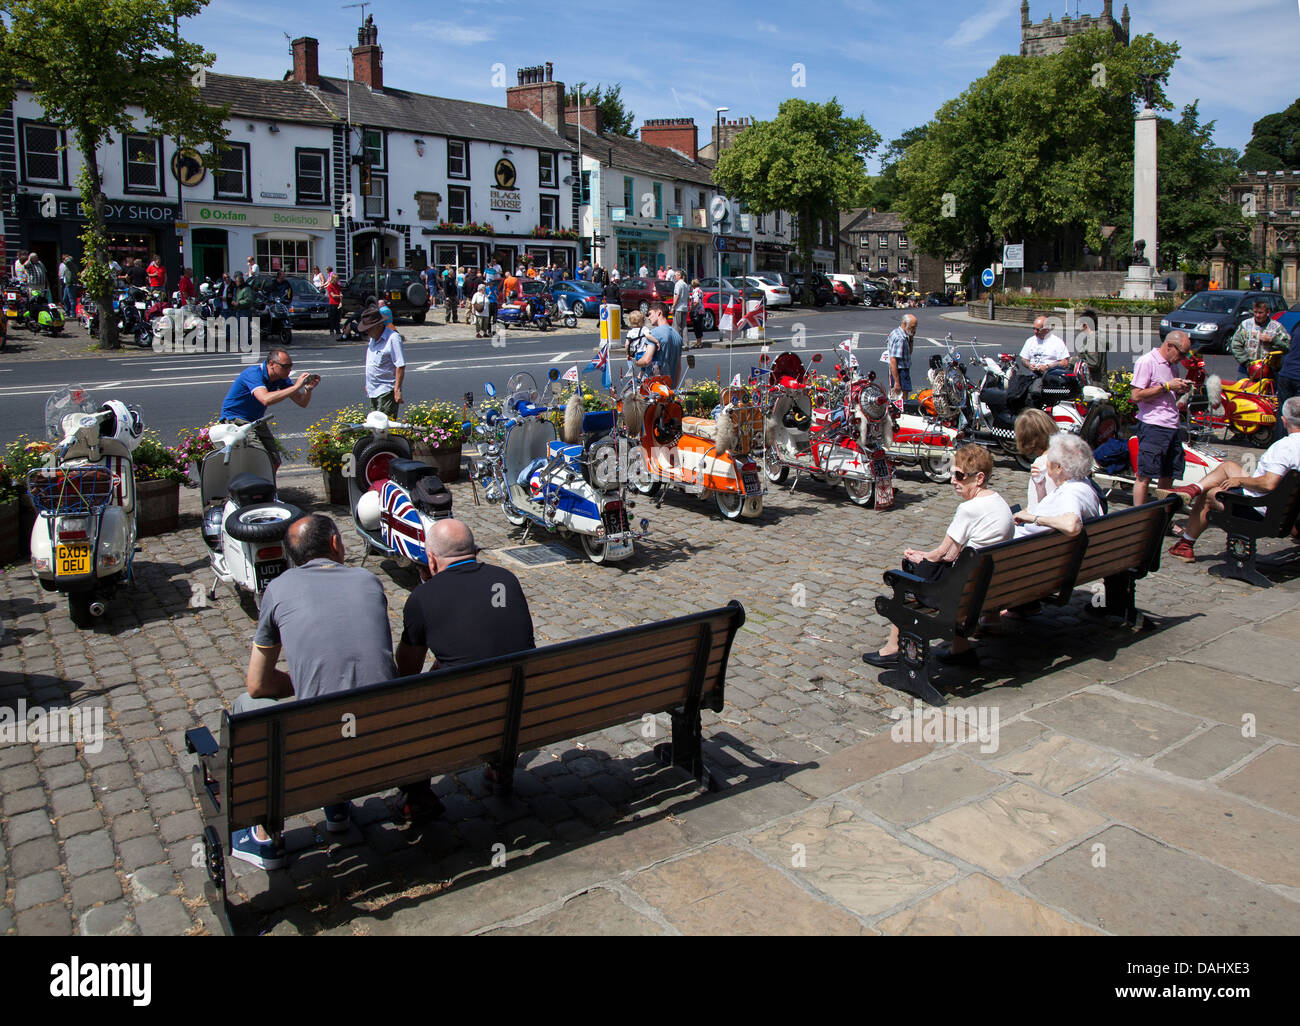 July tourists enjoying the summer weather in the town of Skipton in North Yorkshire. Residents and tourists seated in the summertime sunshine in 2013. Stock Photo